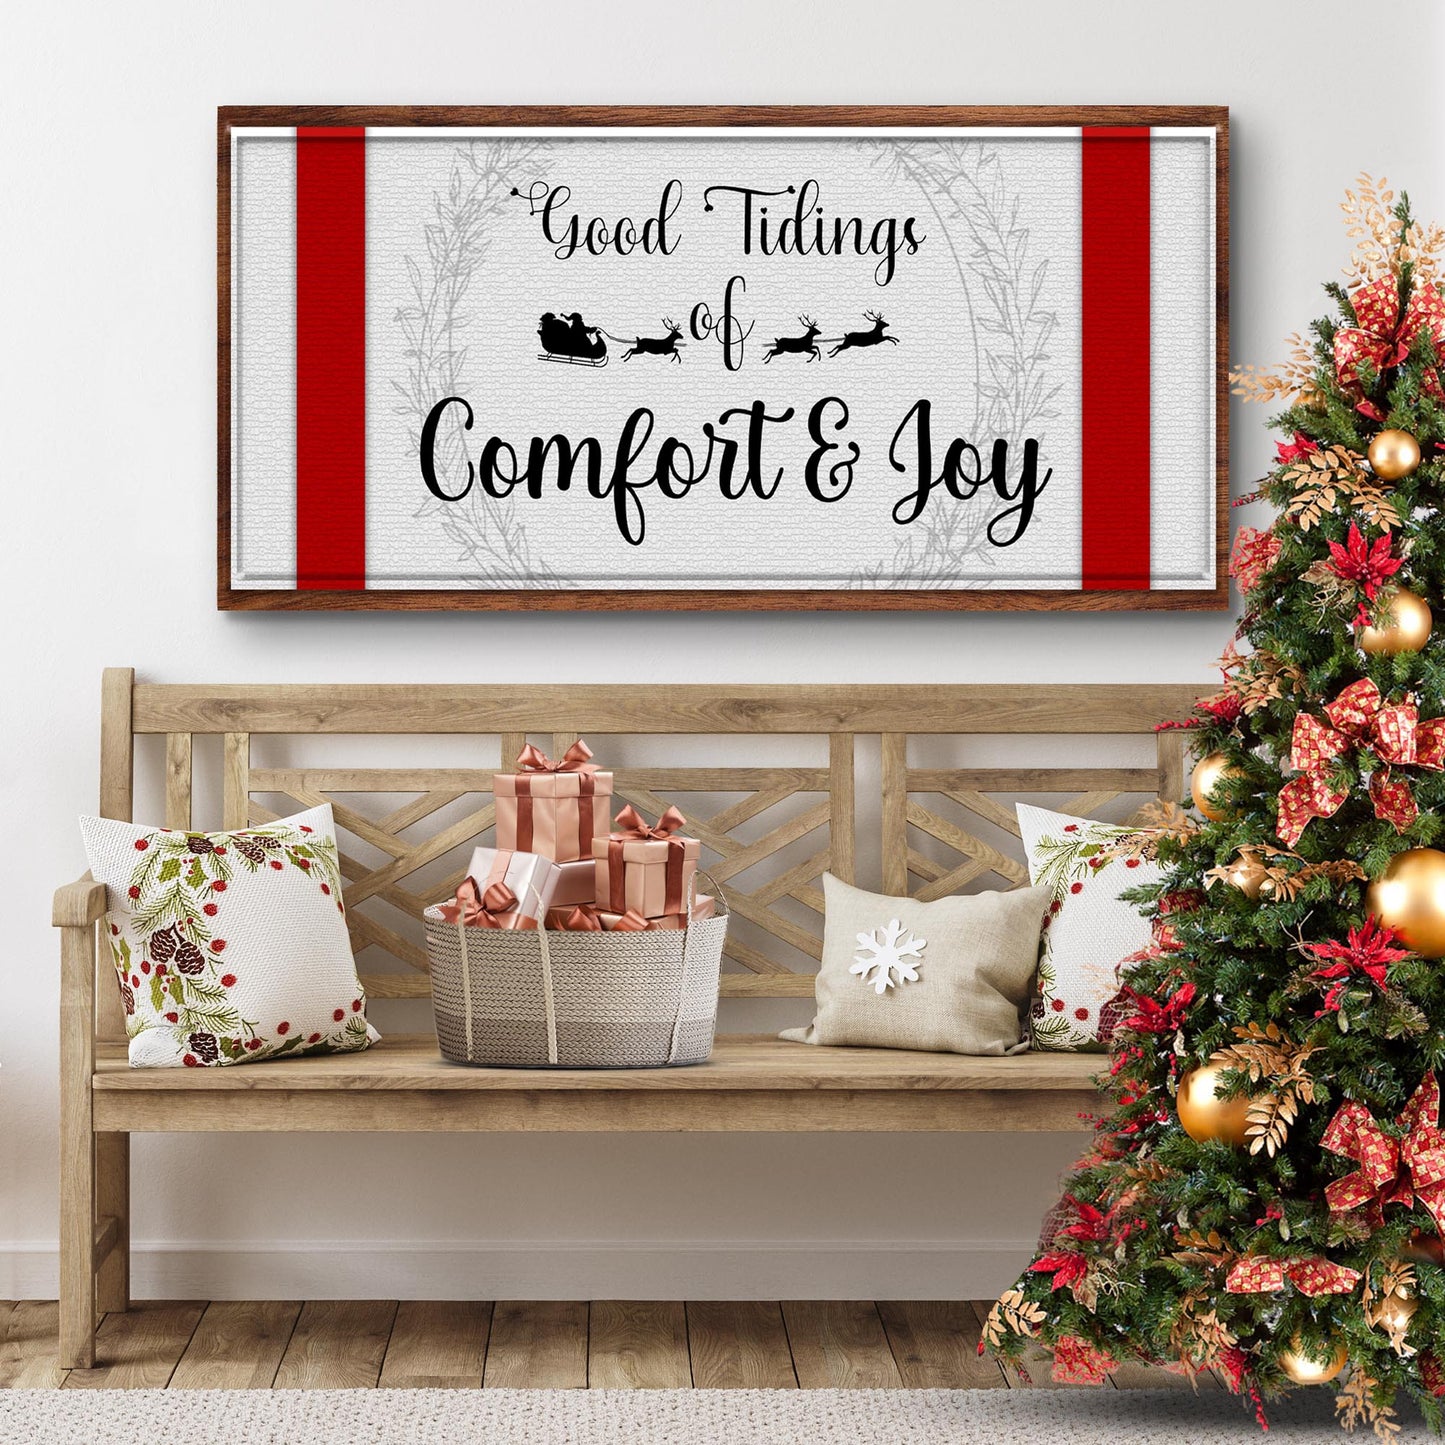 Good Tidings Of Comfort And Joy Sign IV - Image by Tailored Canvases